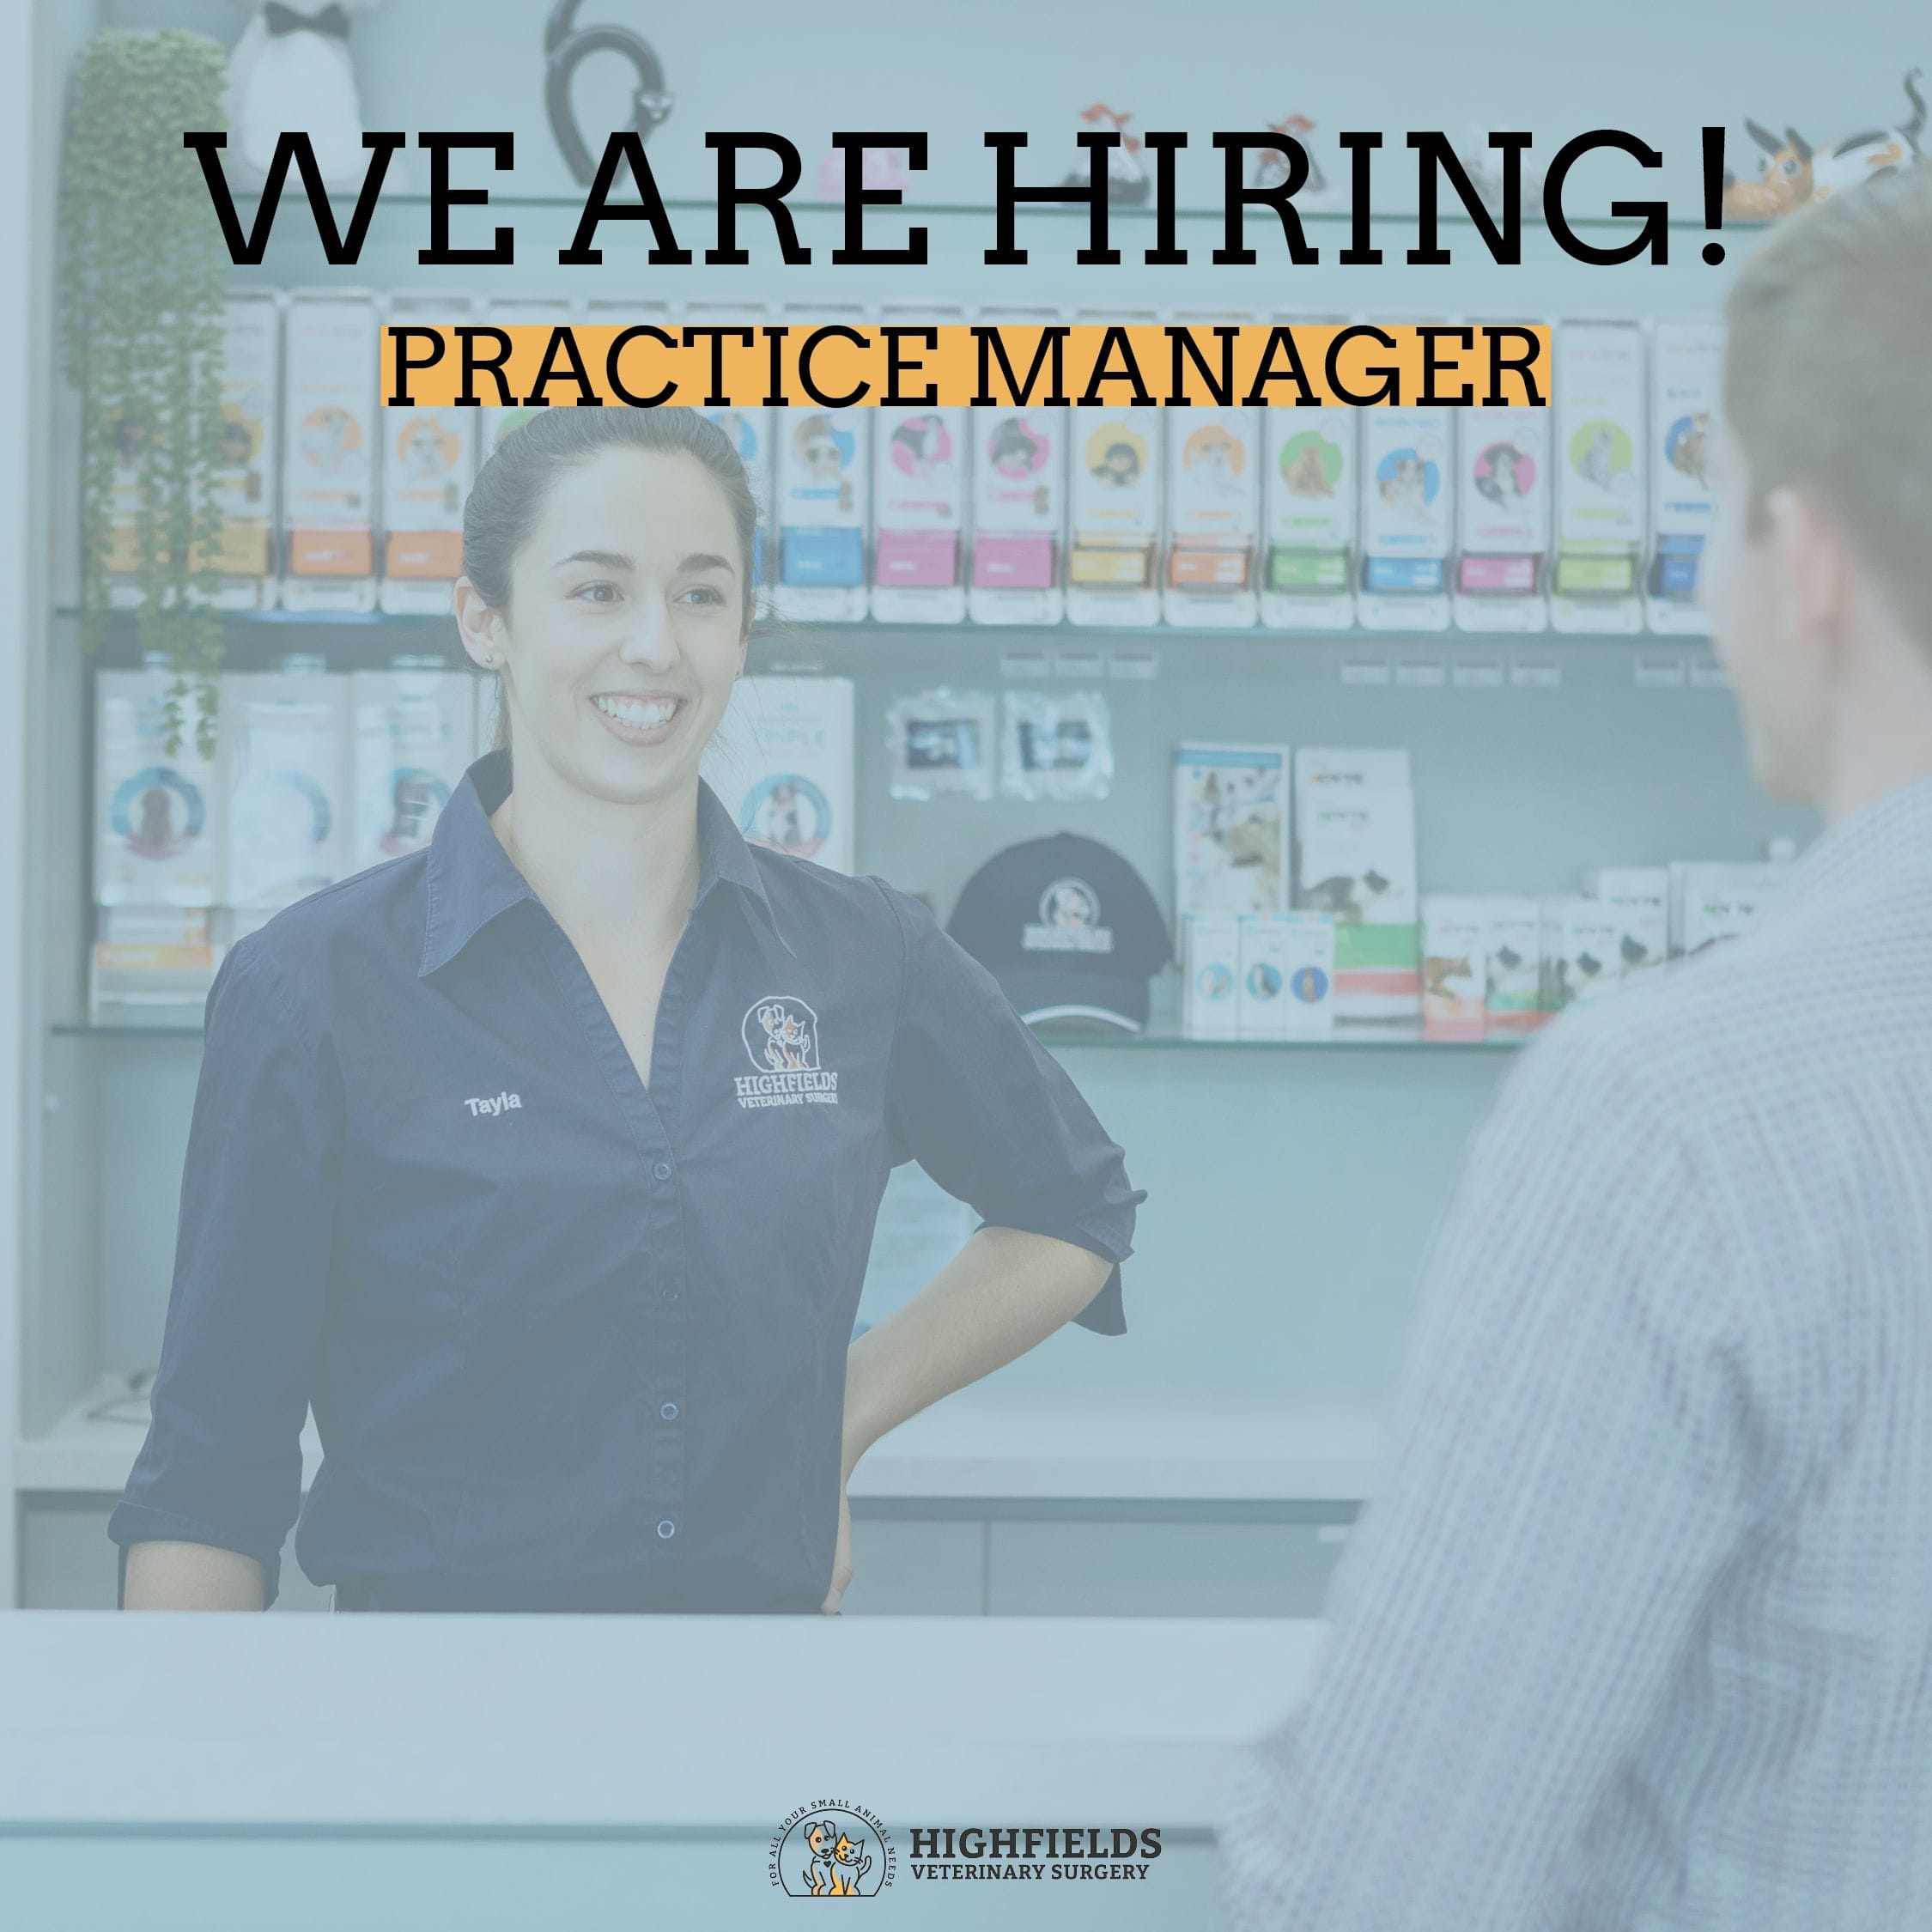 Want to be our next Practice Manager?!